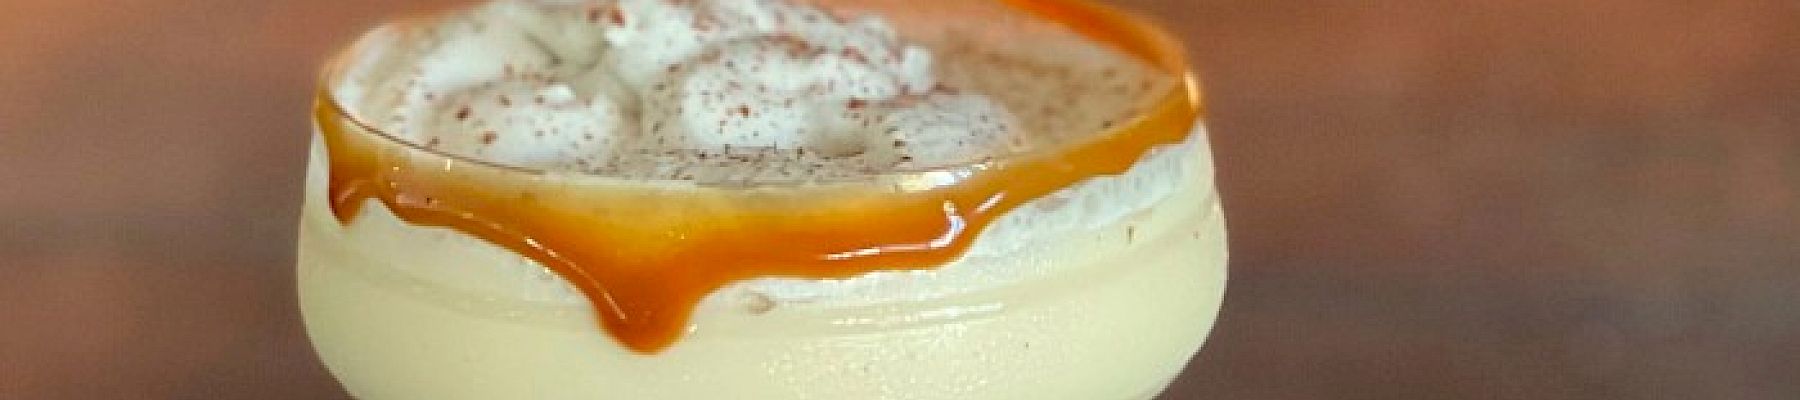 A creamy cocktail in a glass with caramel drizzling down the side, topped with whipped cream and sprinkled spices, set against a background of flames.